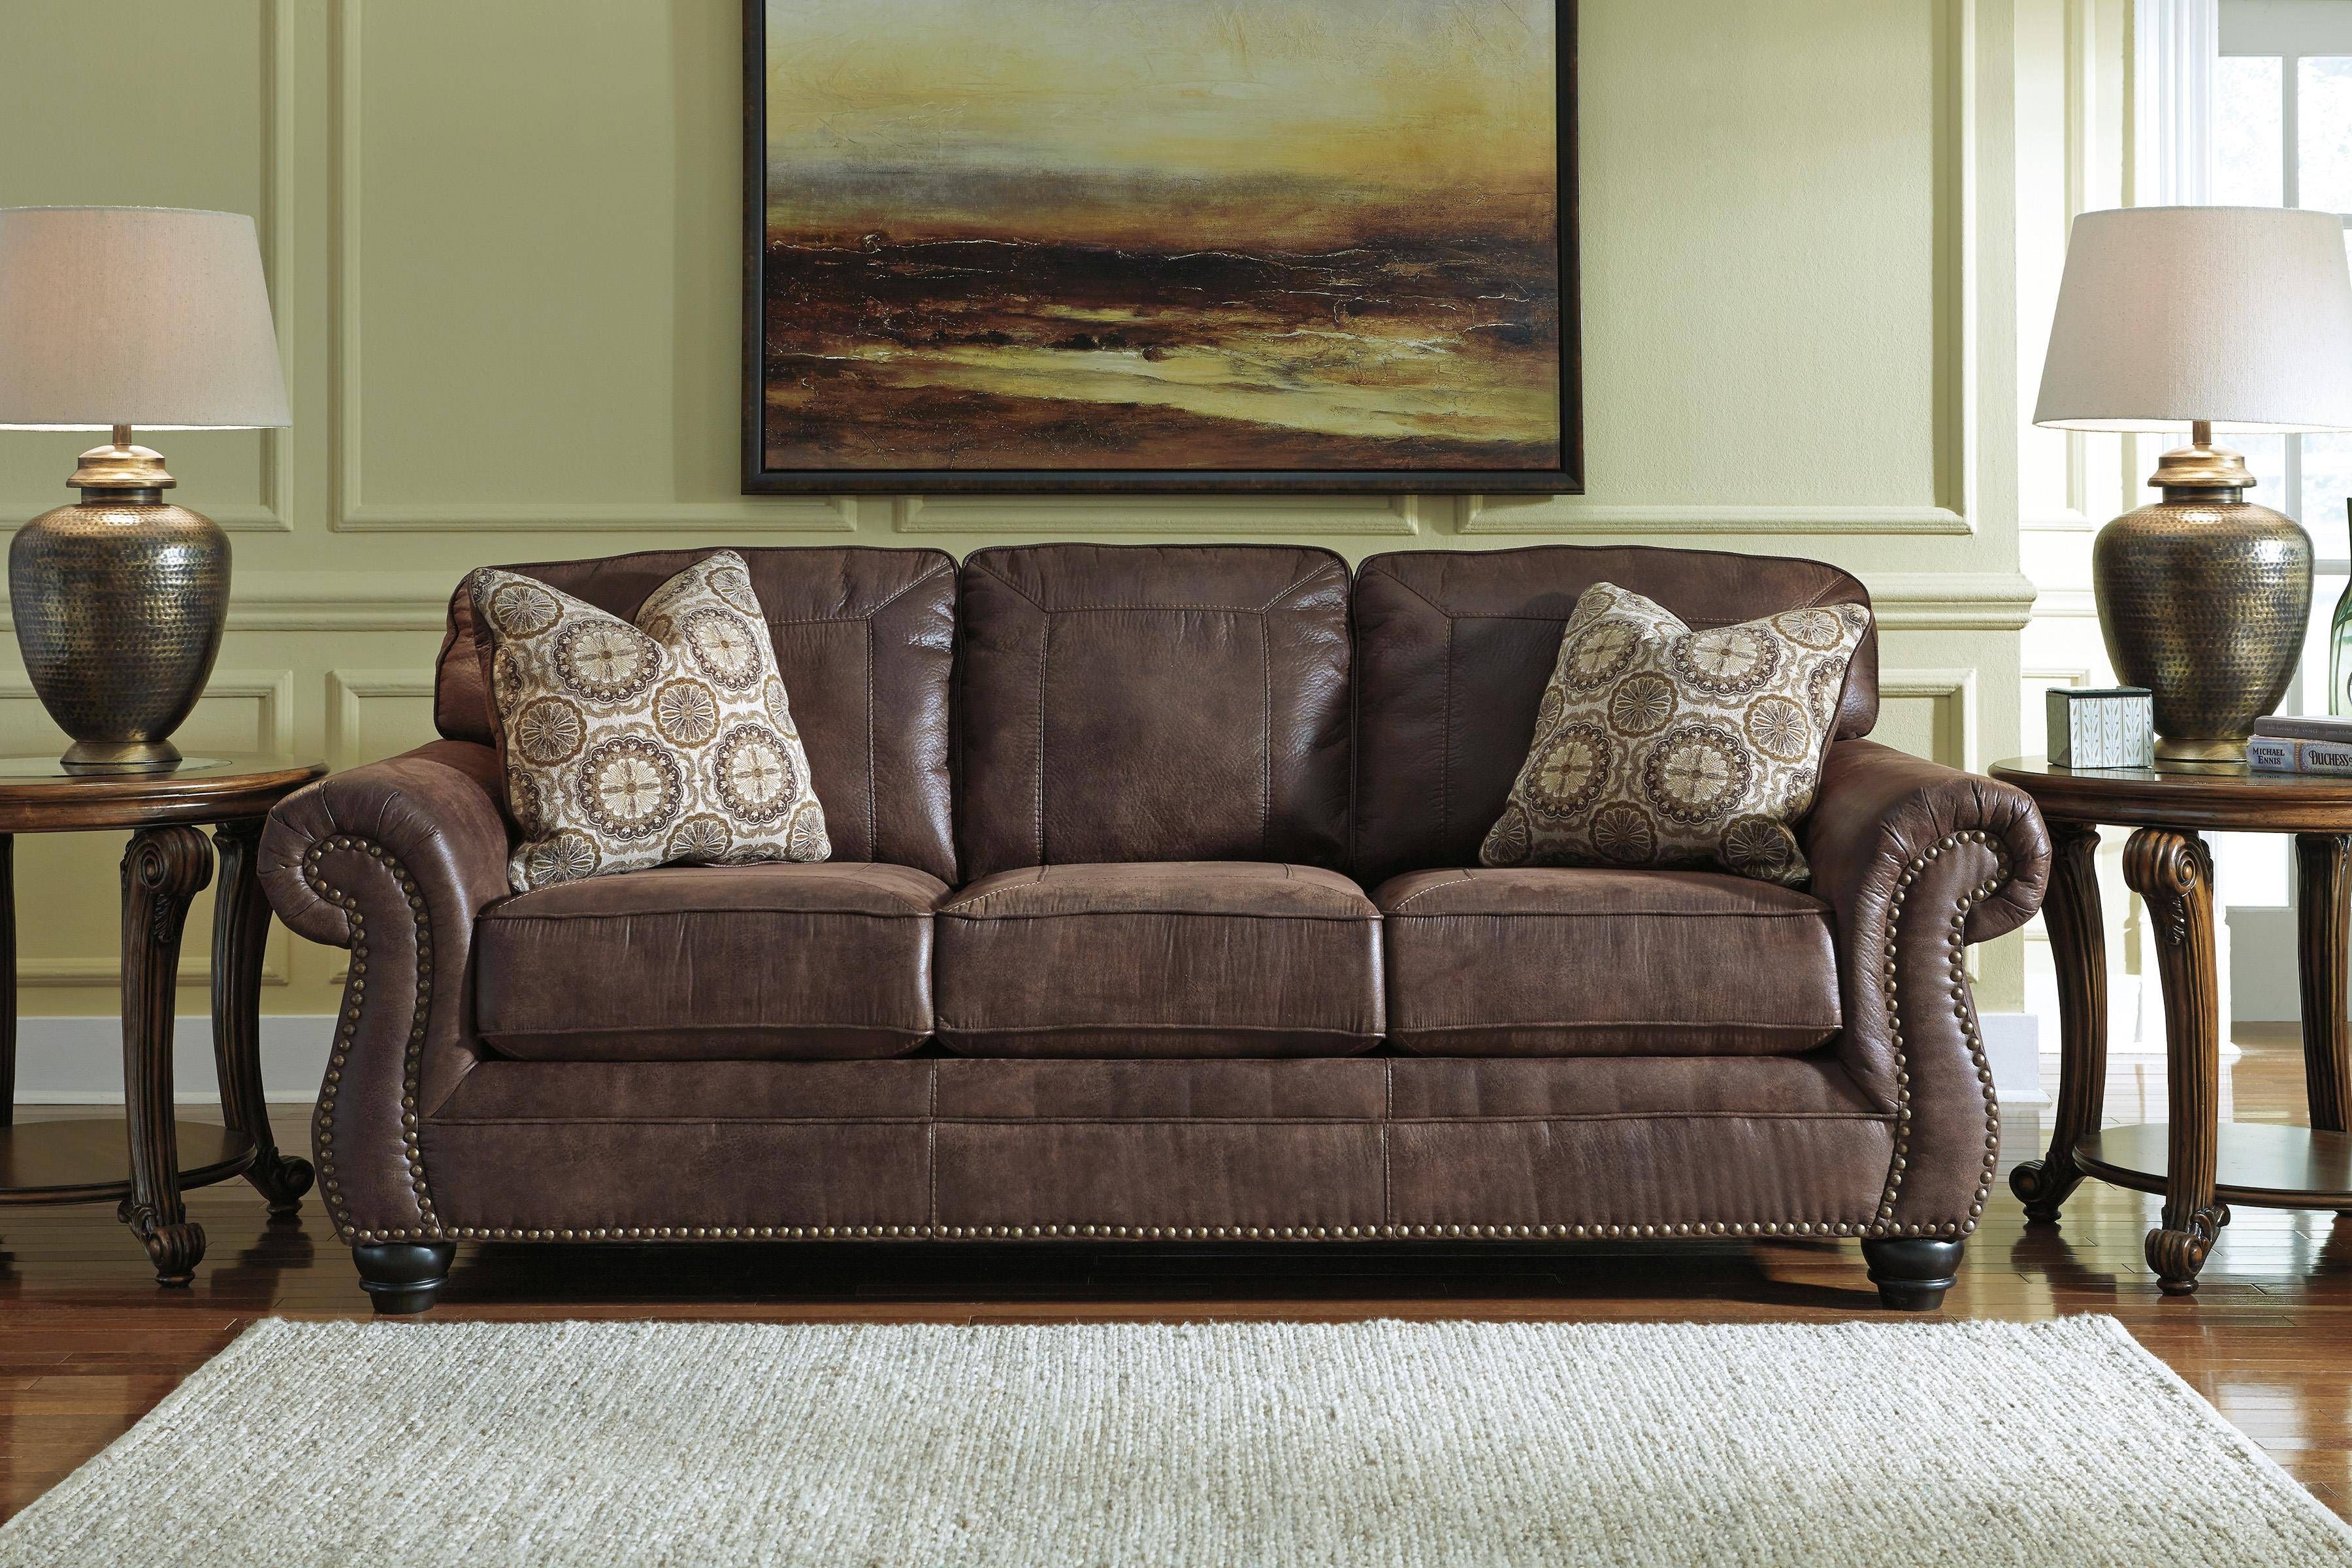 Faux Leather Sofa With Rolled Arms And Nailhead Trimbenchcraft Regarding Benchcraft Leather Sofas (View 6 of 15)